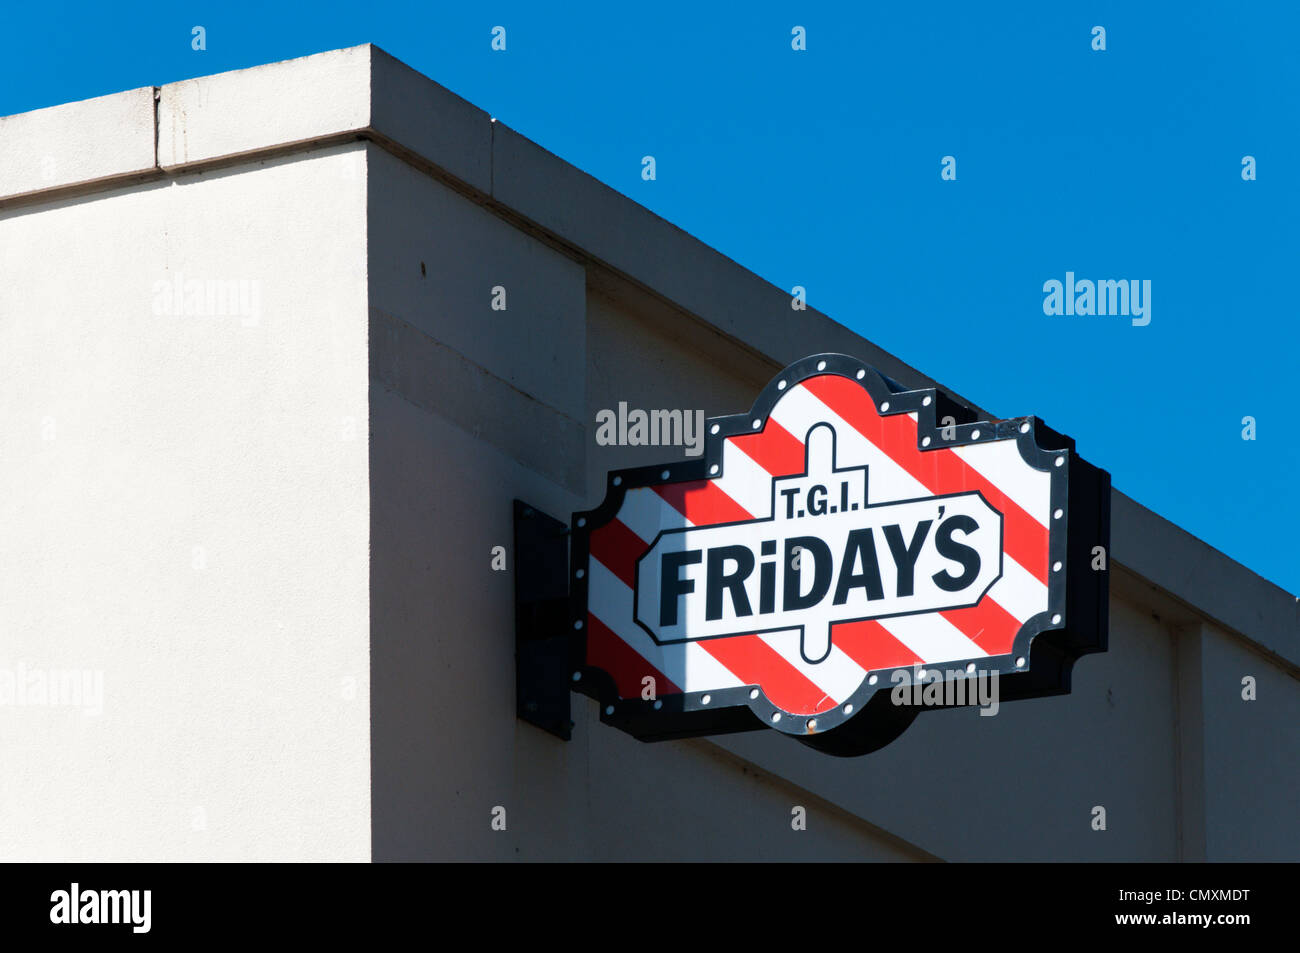 Sign for T.G.I. Friday's restaurant in Croydon, England Stock Photo